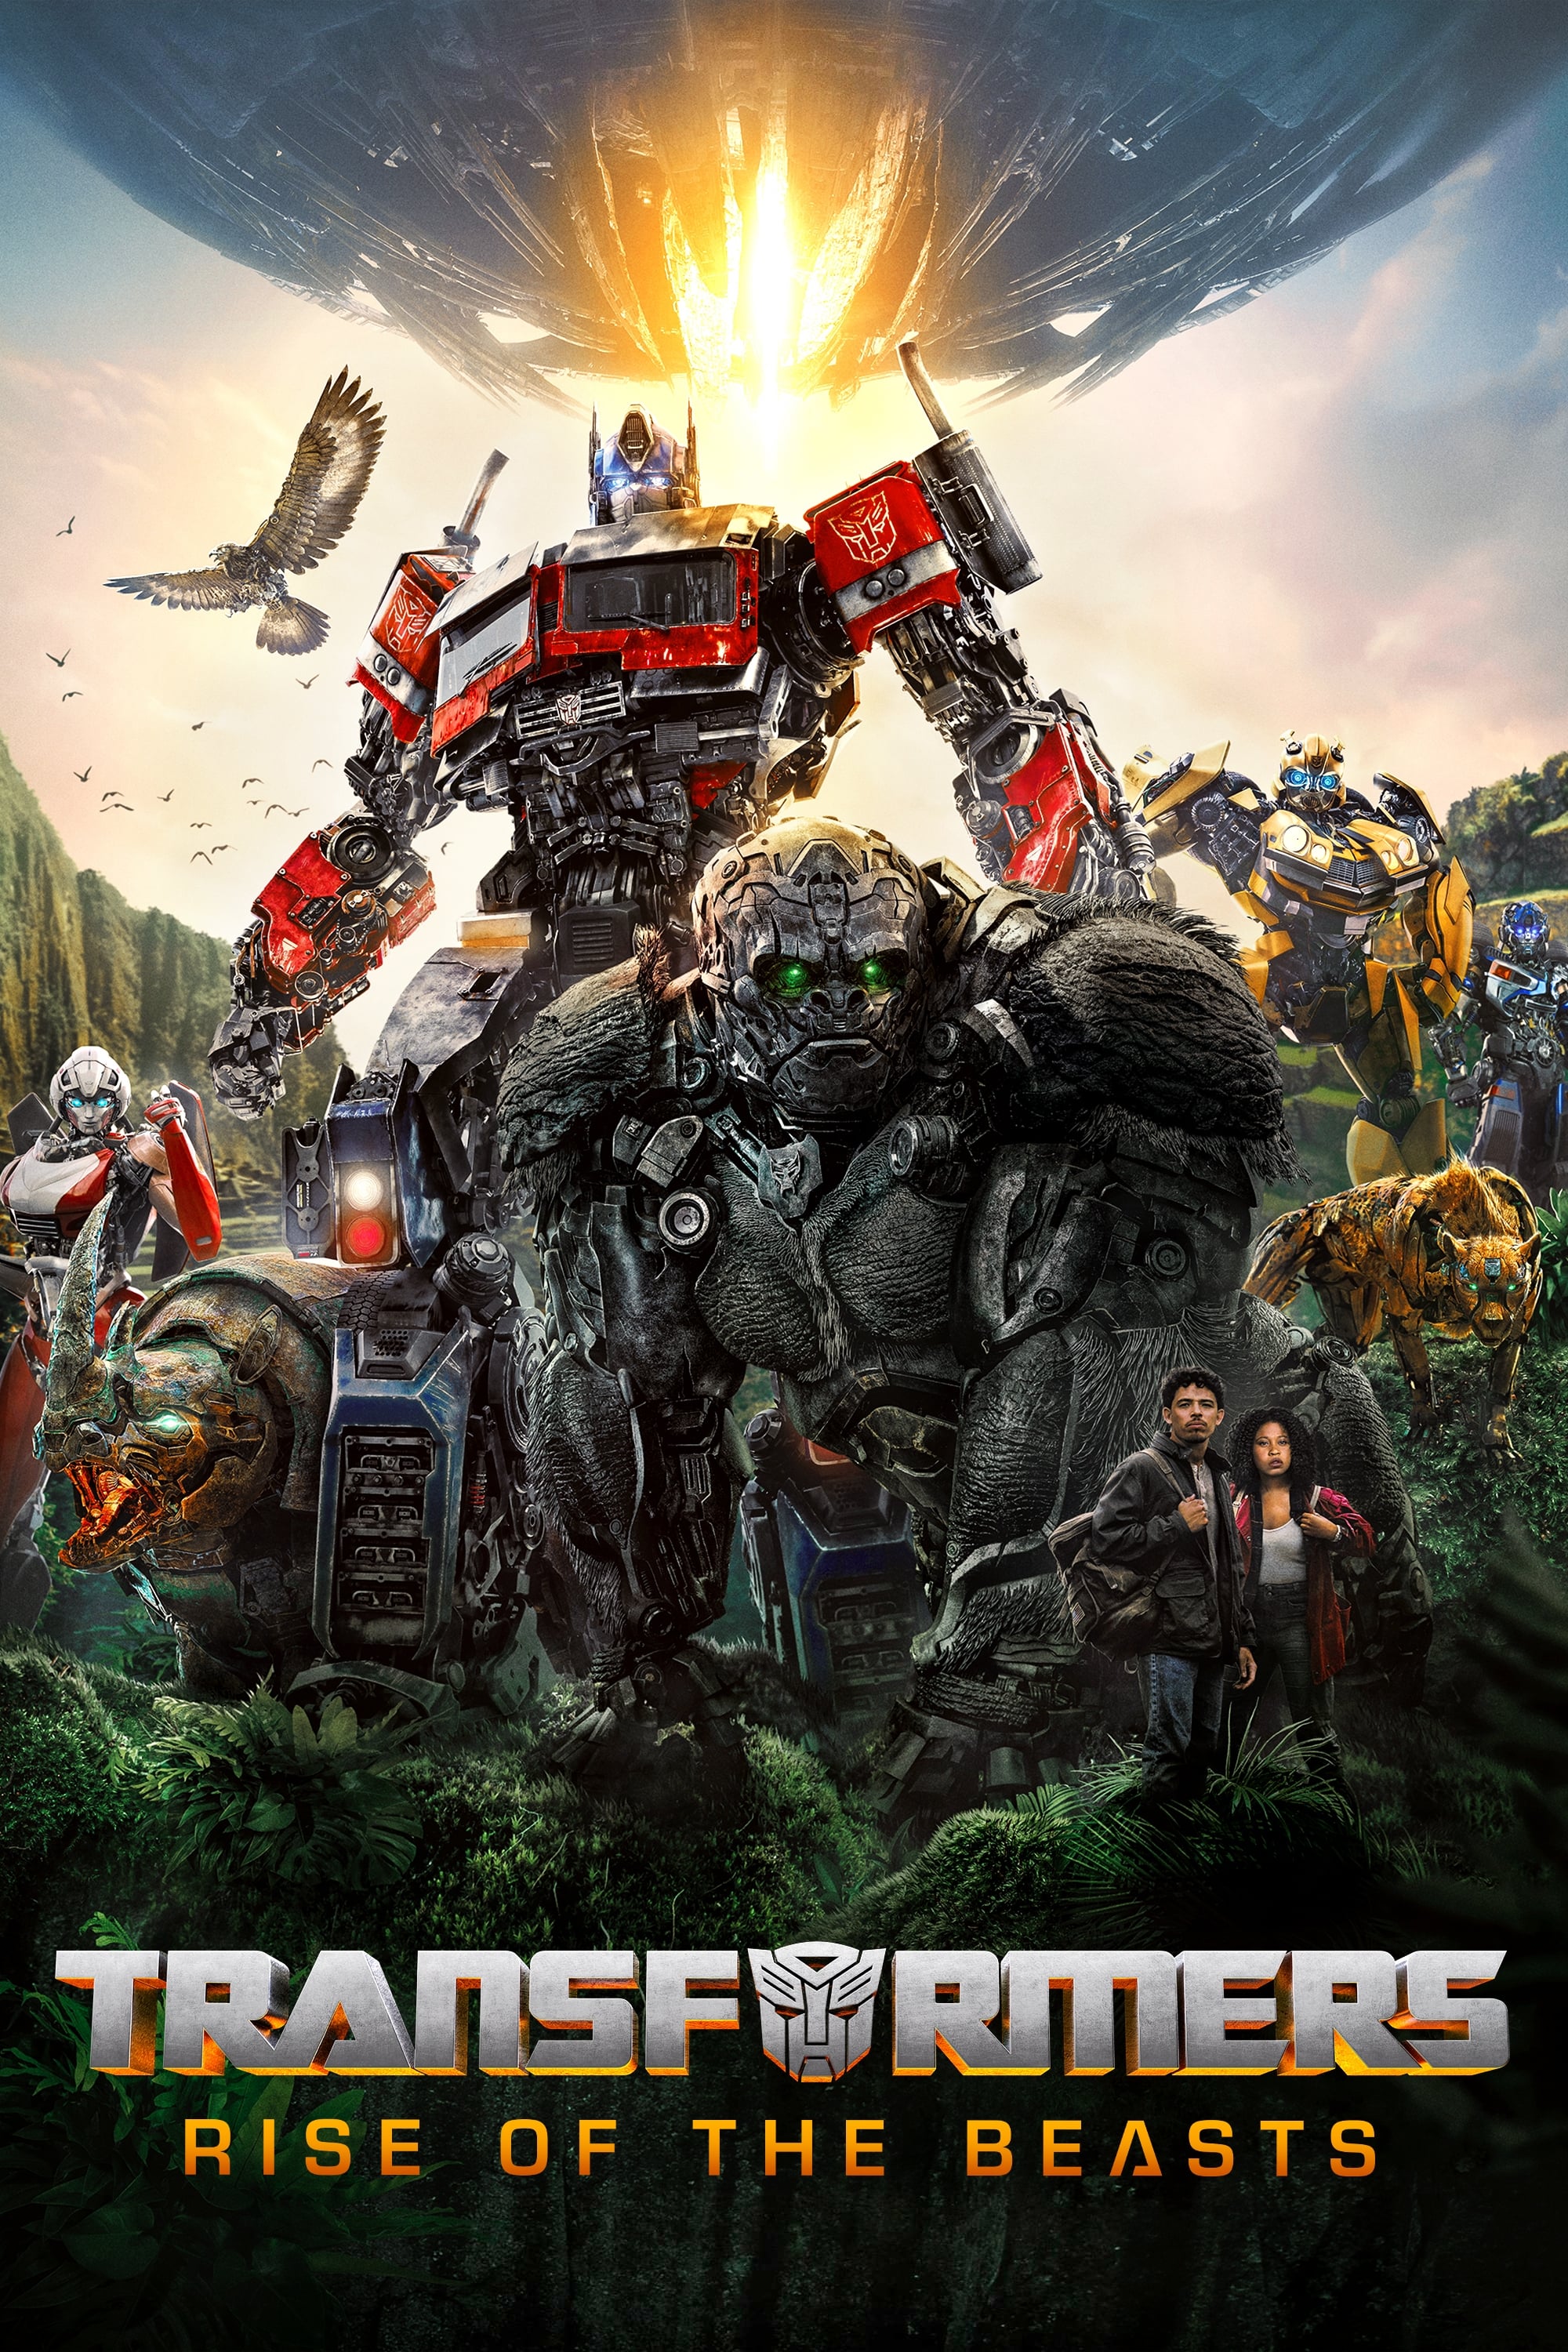 Transformers: Rise of the Beasts Cast And Crew